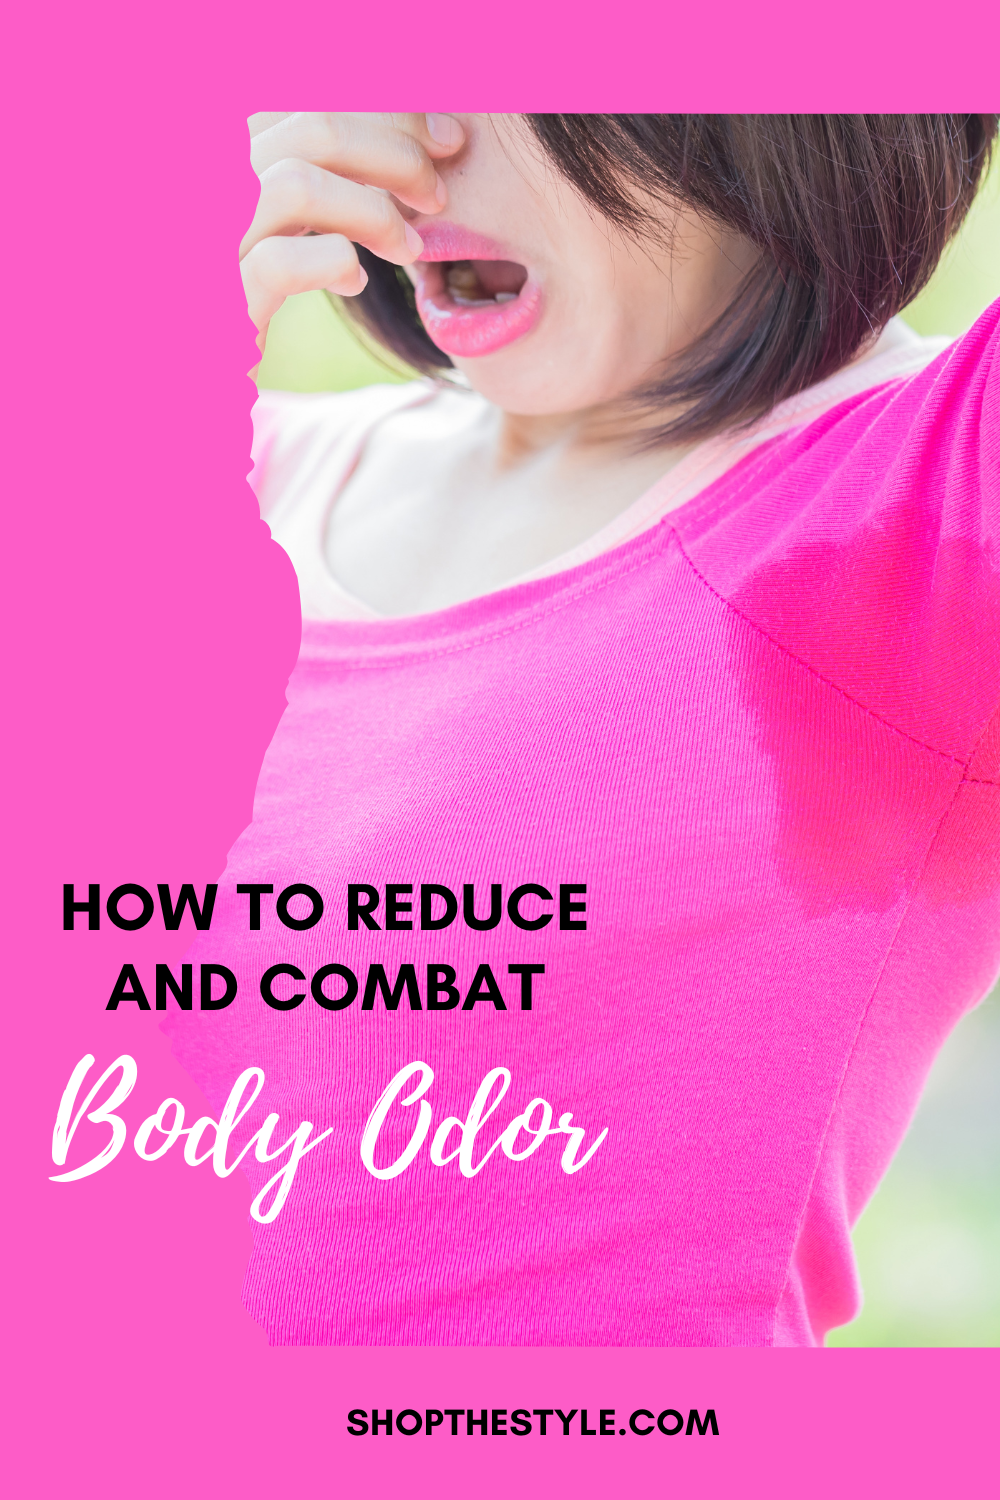 How To Reduce And Combat Body Odor